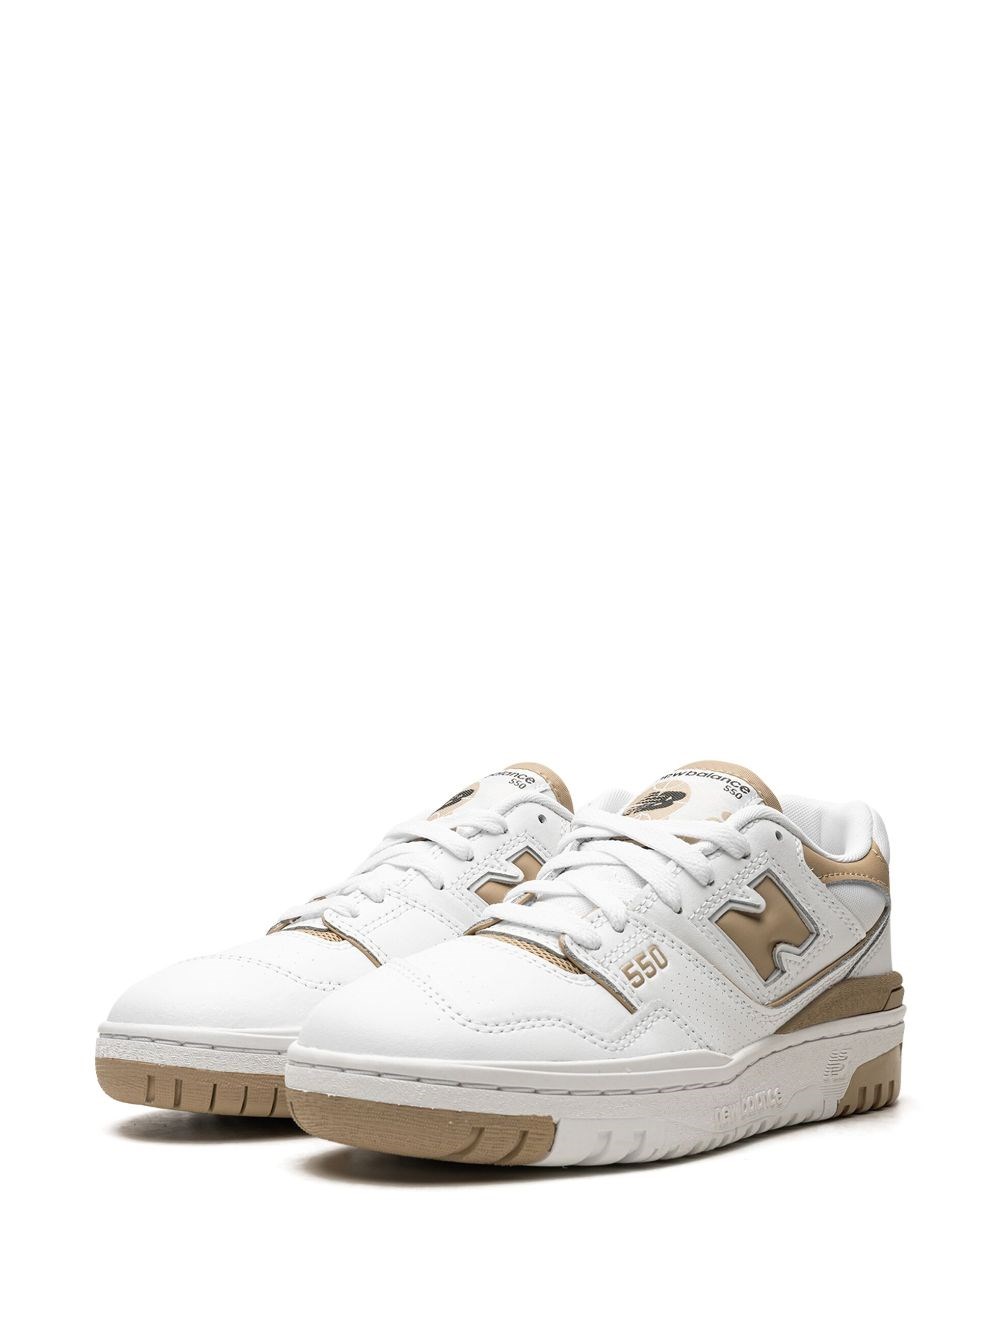 Shop New Balance Sneakers 550 White Beige